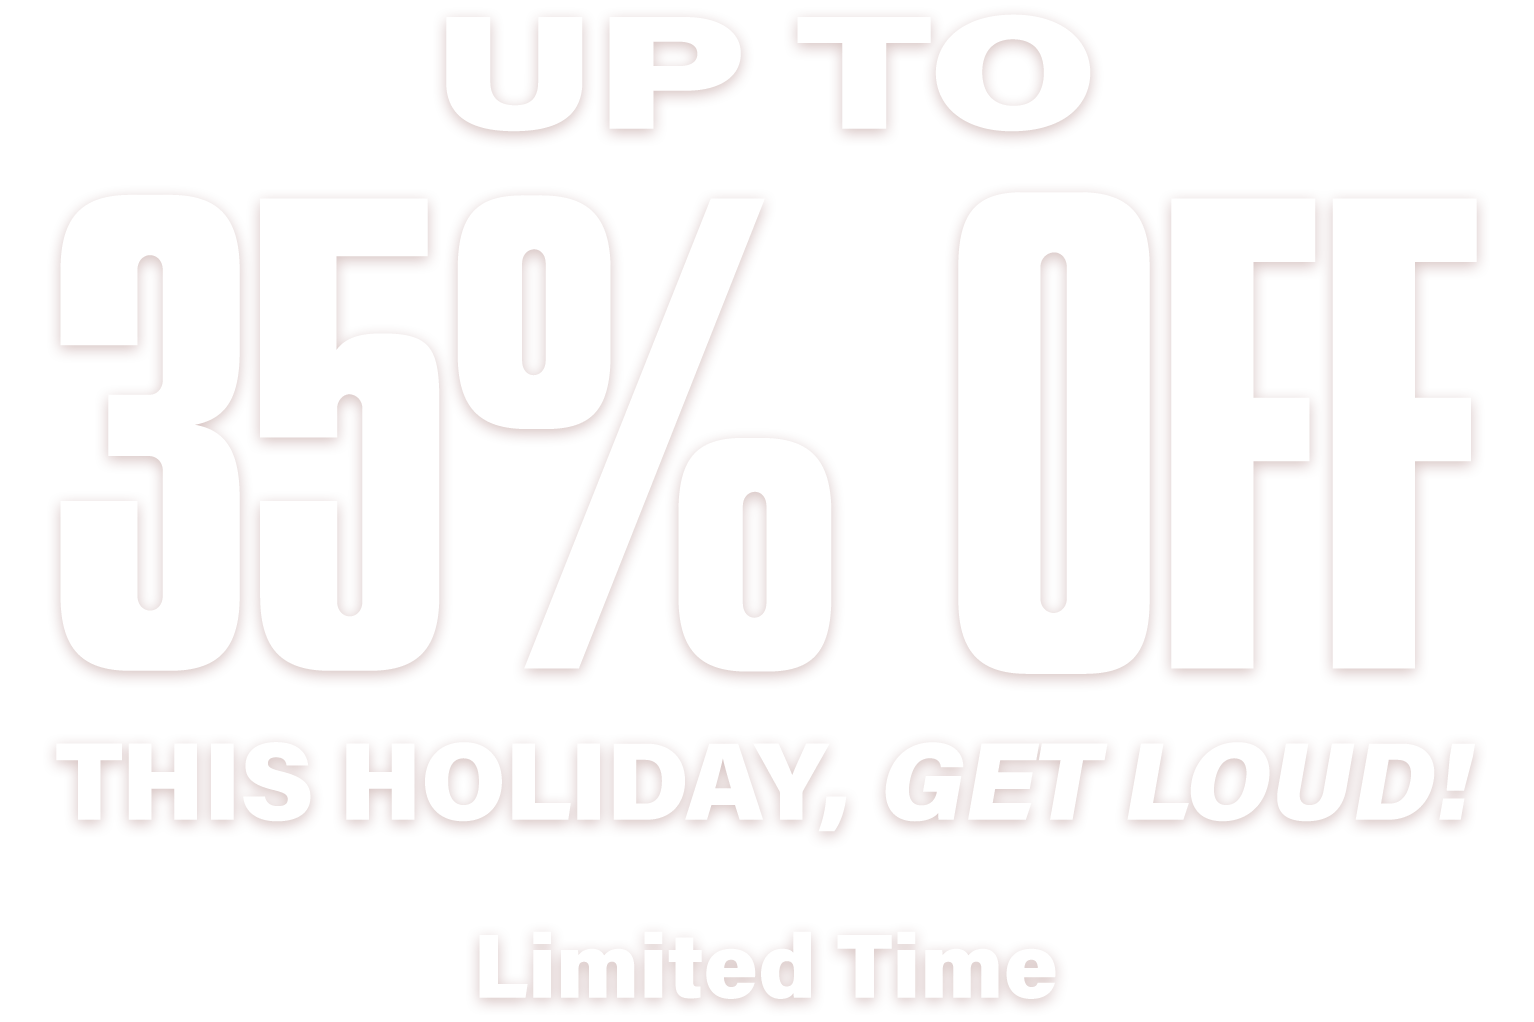 Up to 35 percent off this holiday, get loud! Limited Time.